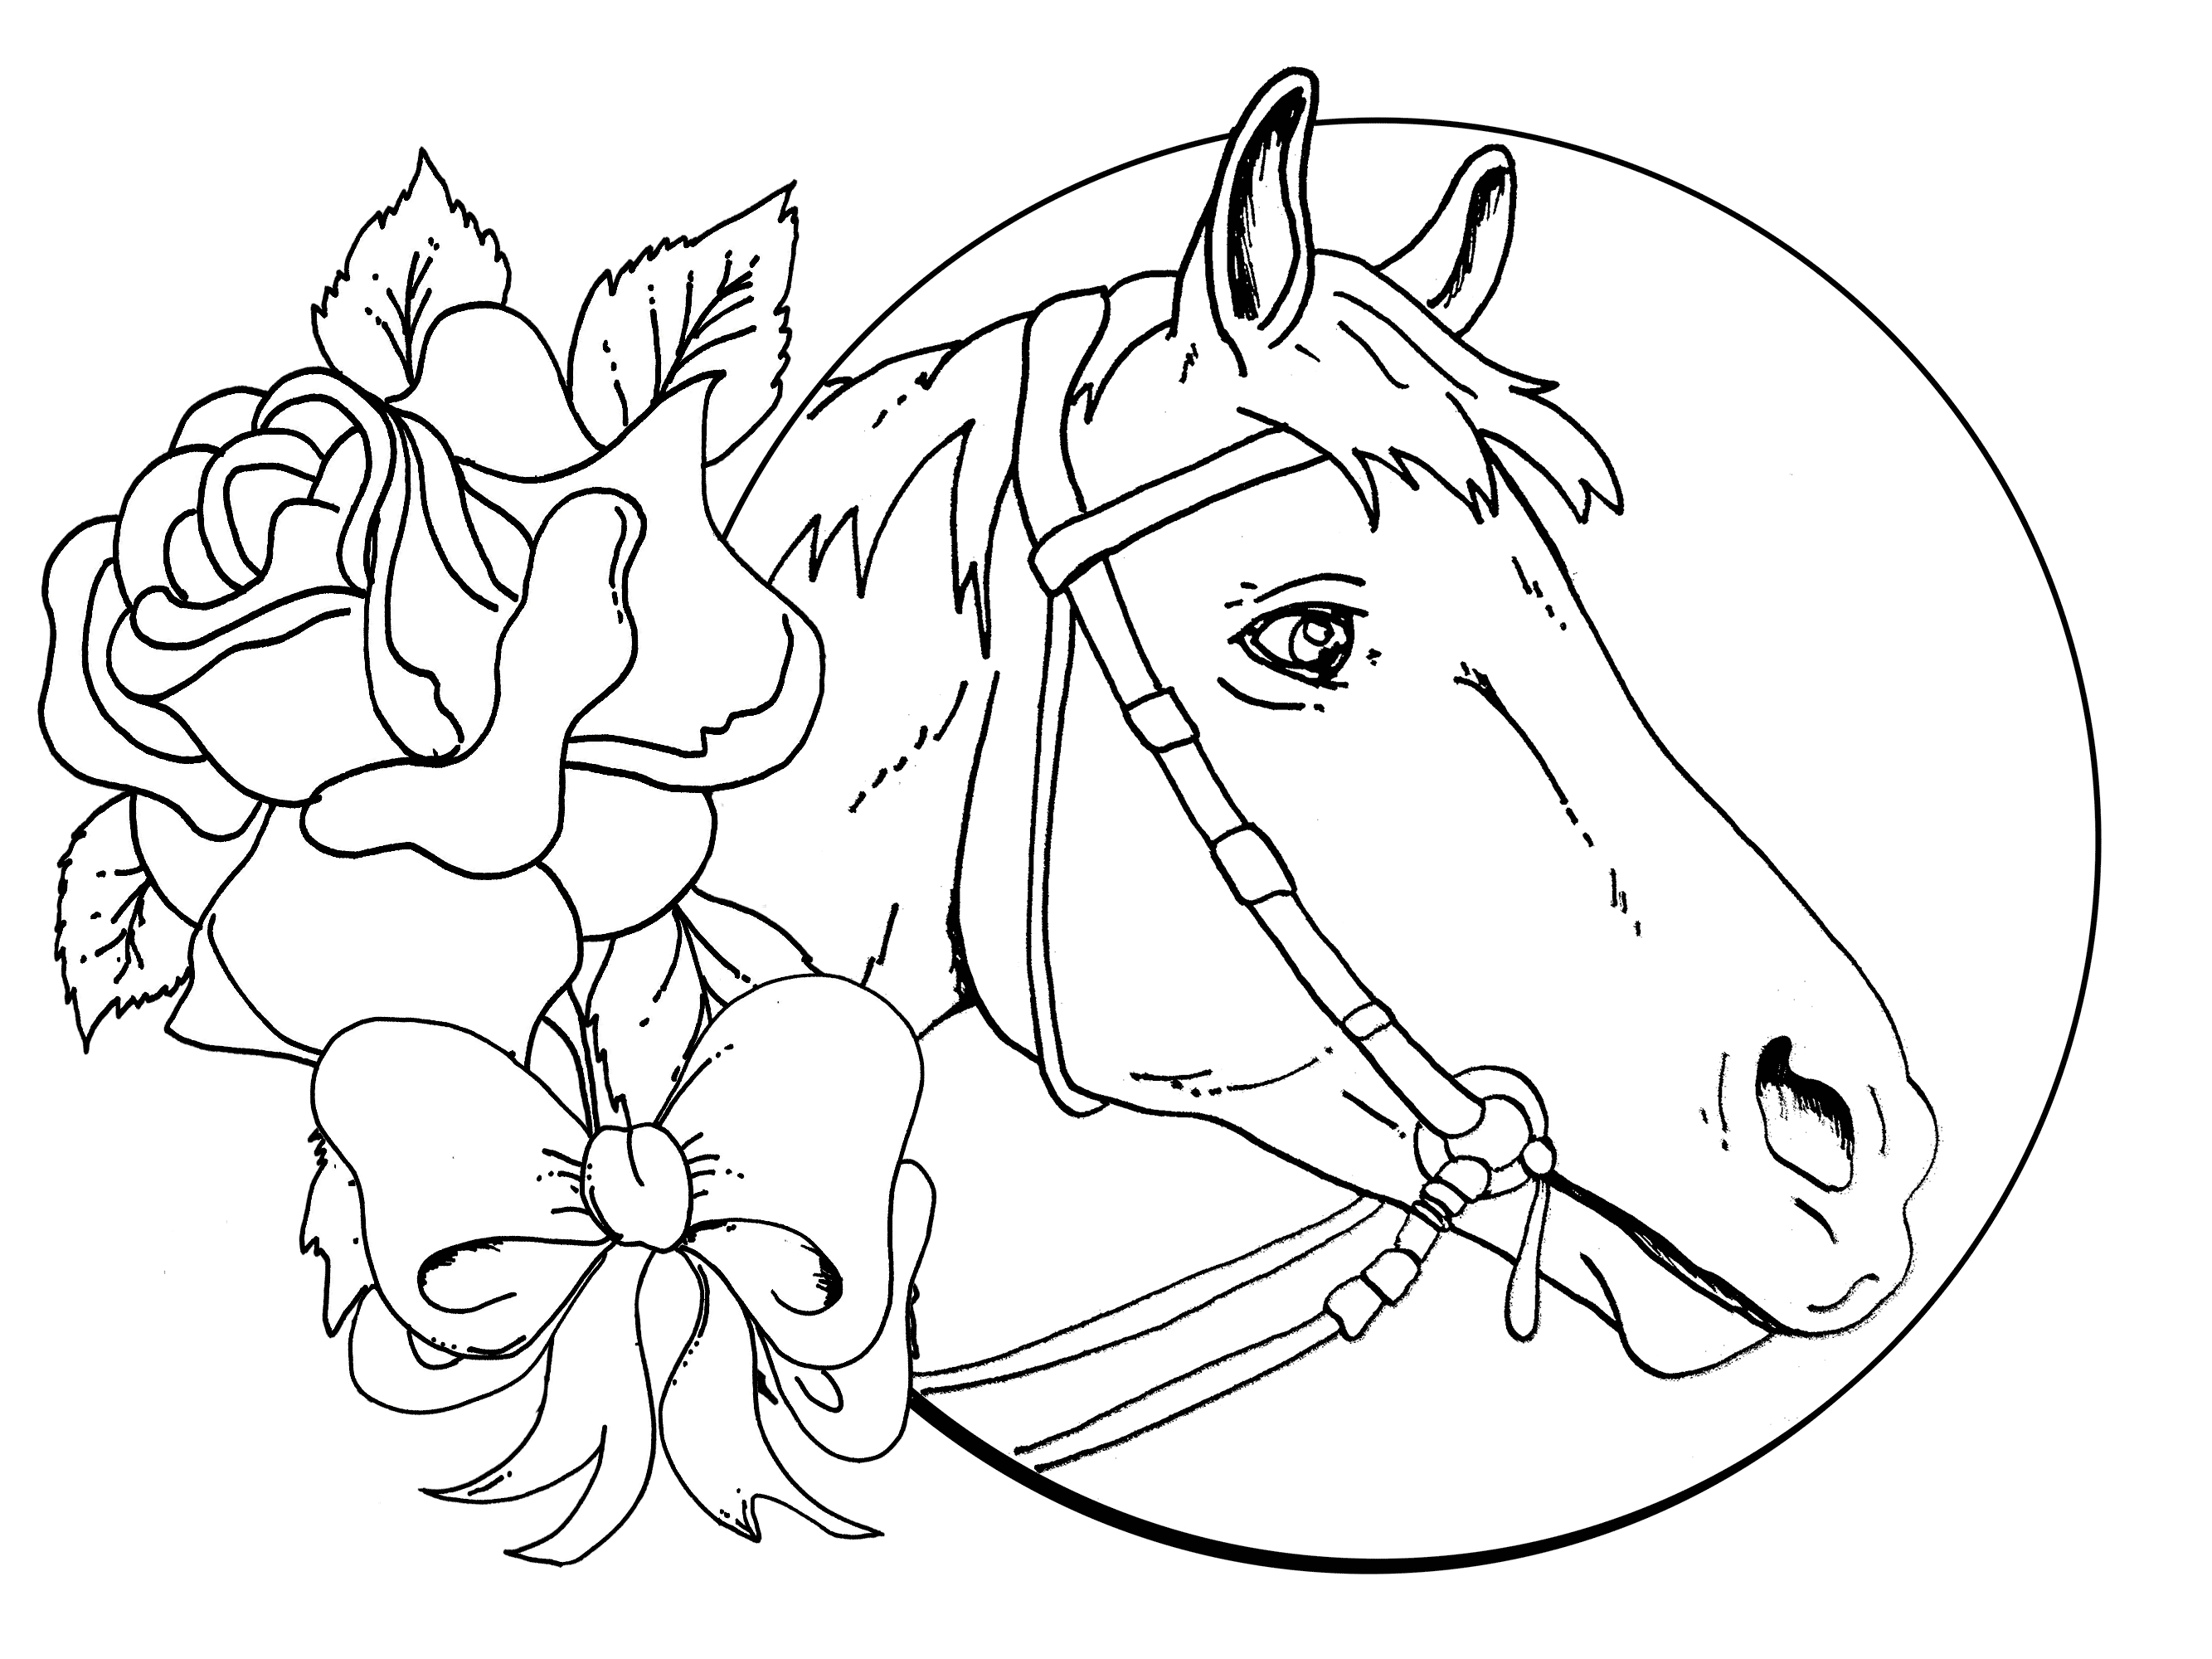 Printable Coloring Pages For Girls - ossaba